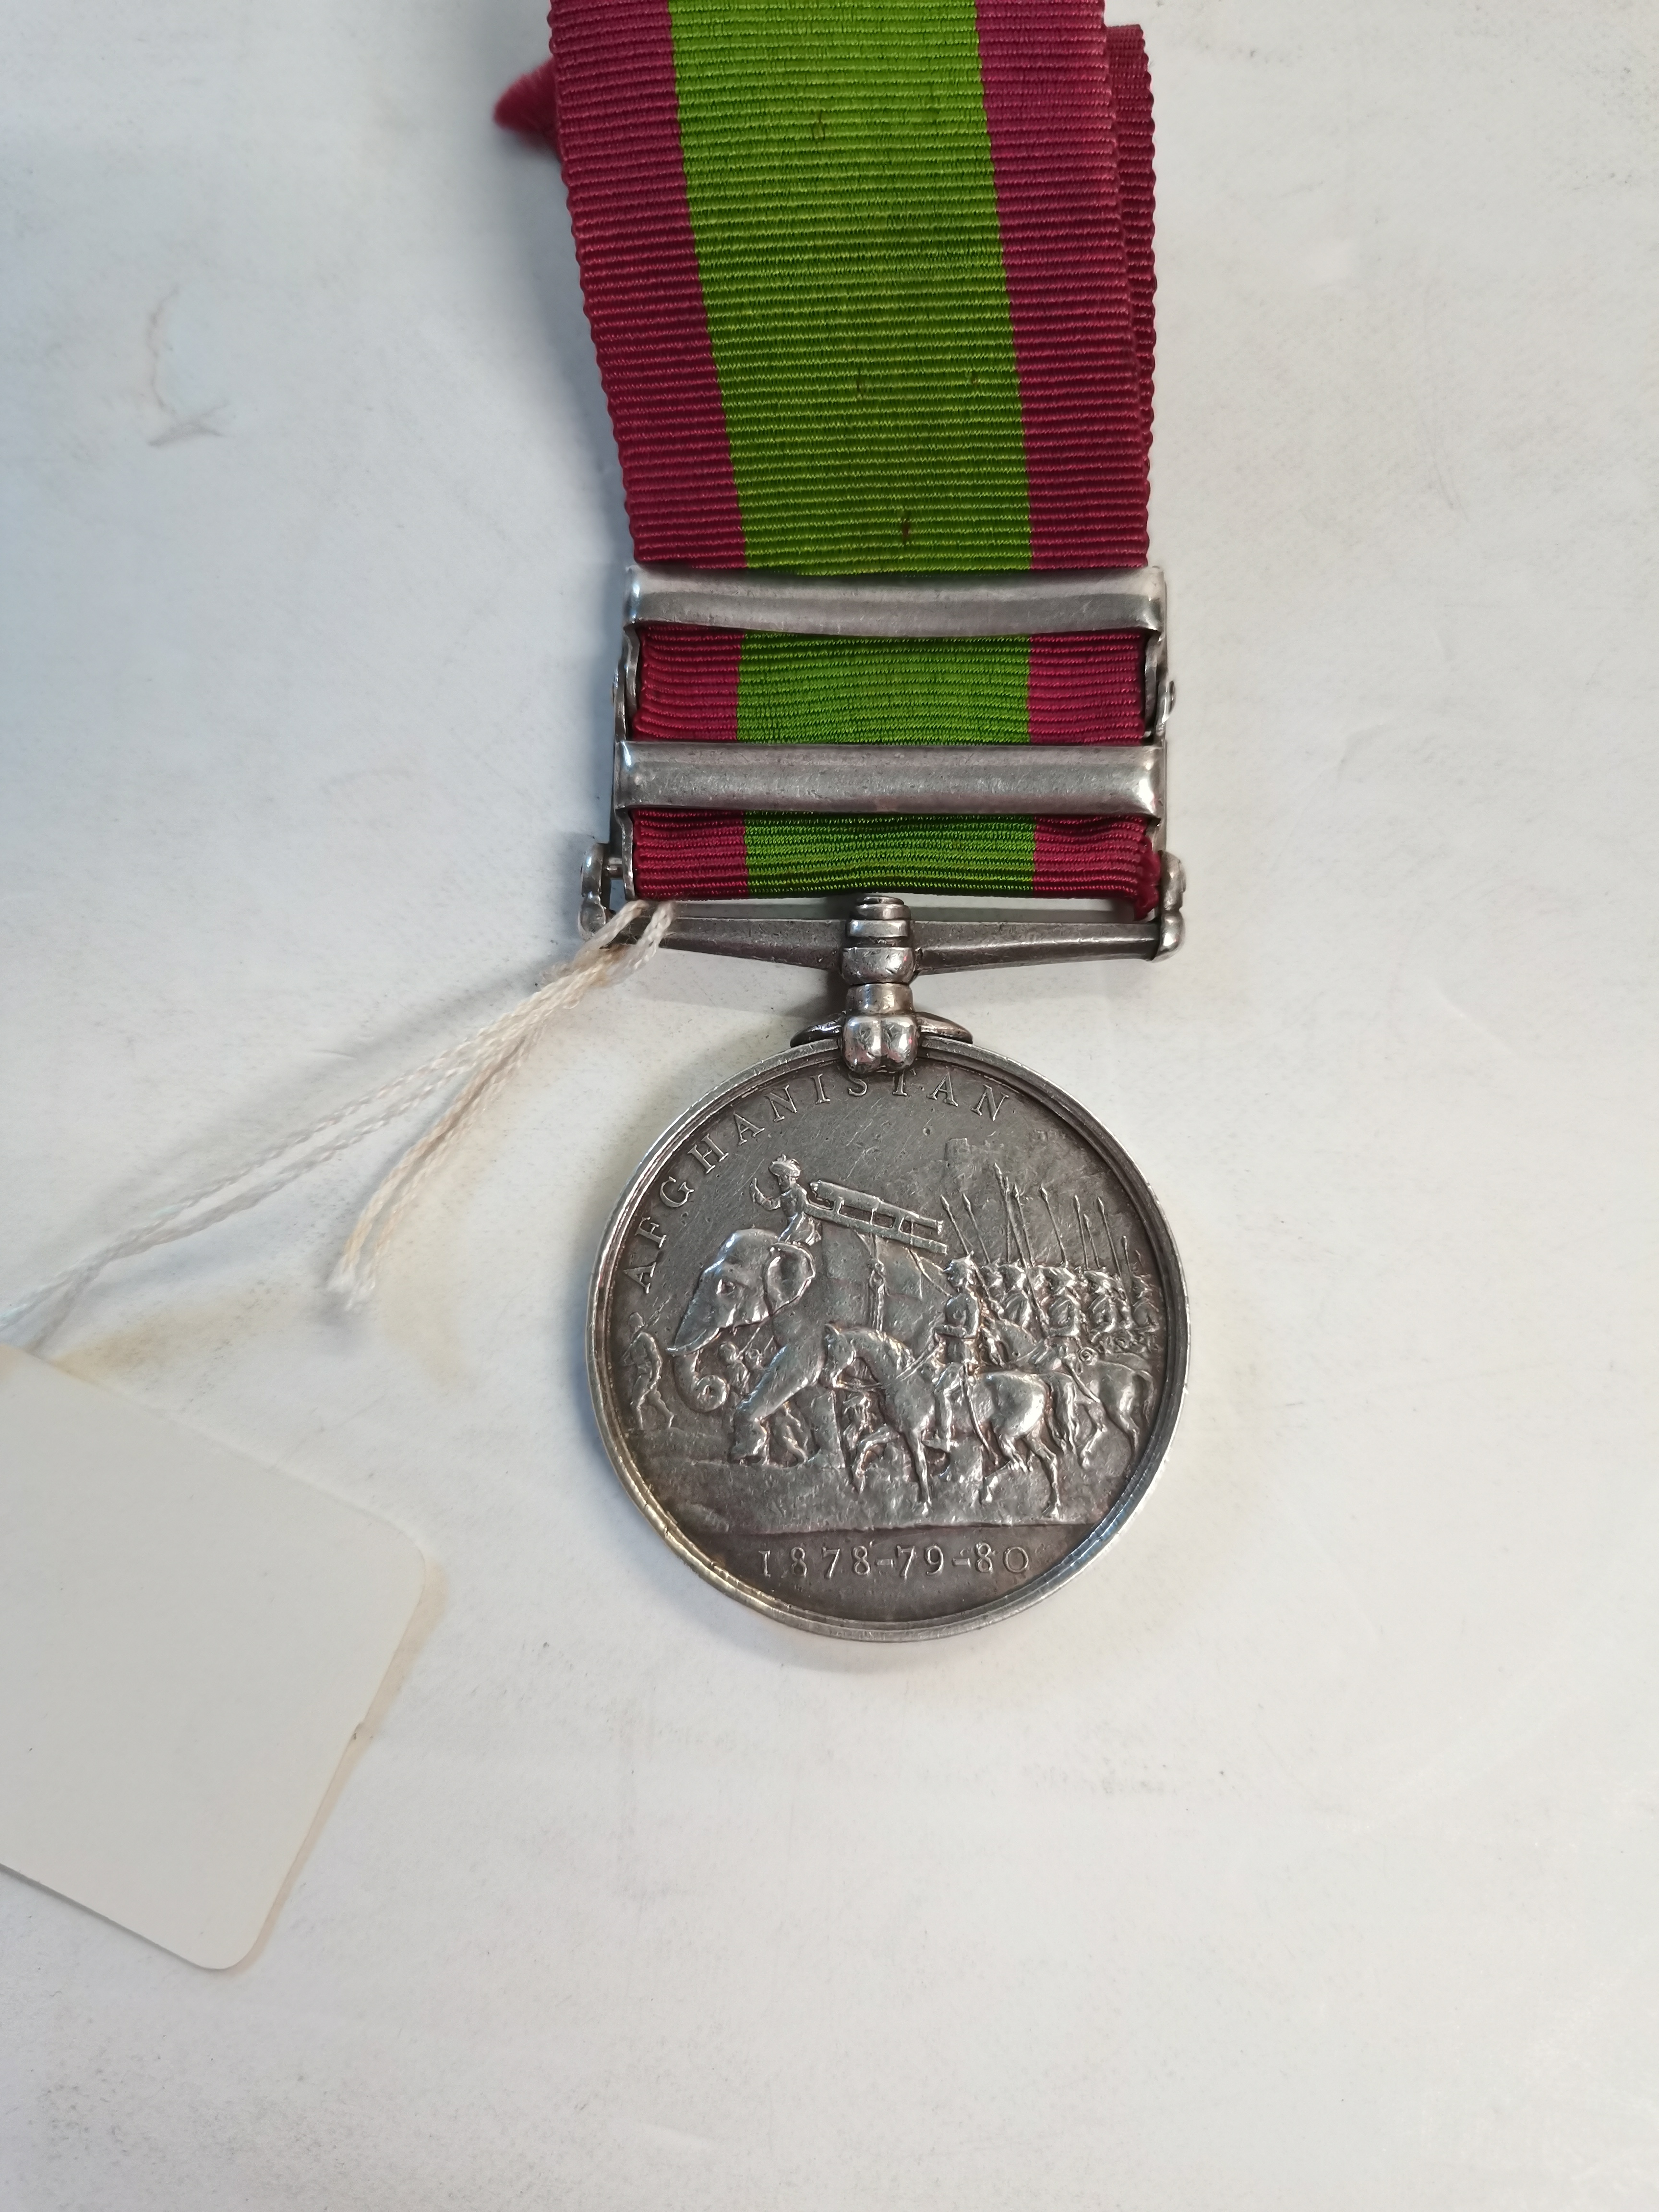 Afganistan 1878 medal with 2 x clasps to 7515 PTE. F. TOE 2/60TH - Image 2 of 4